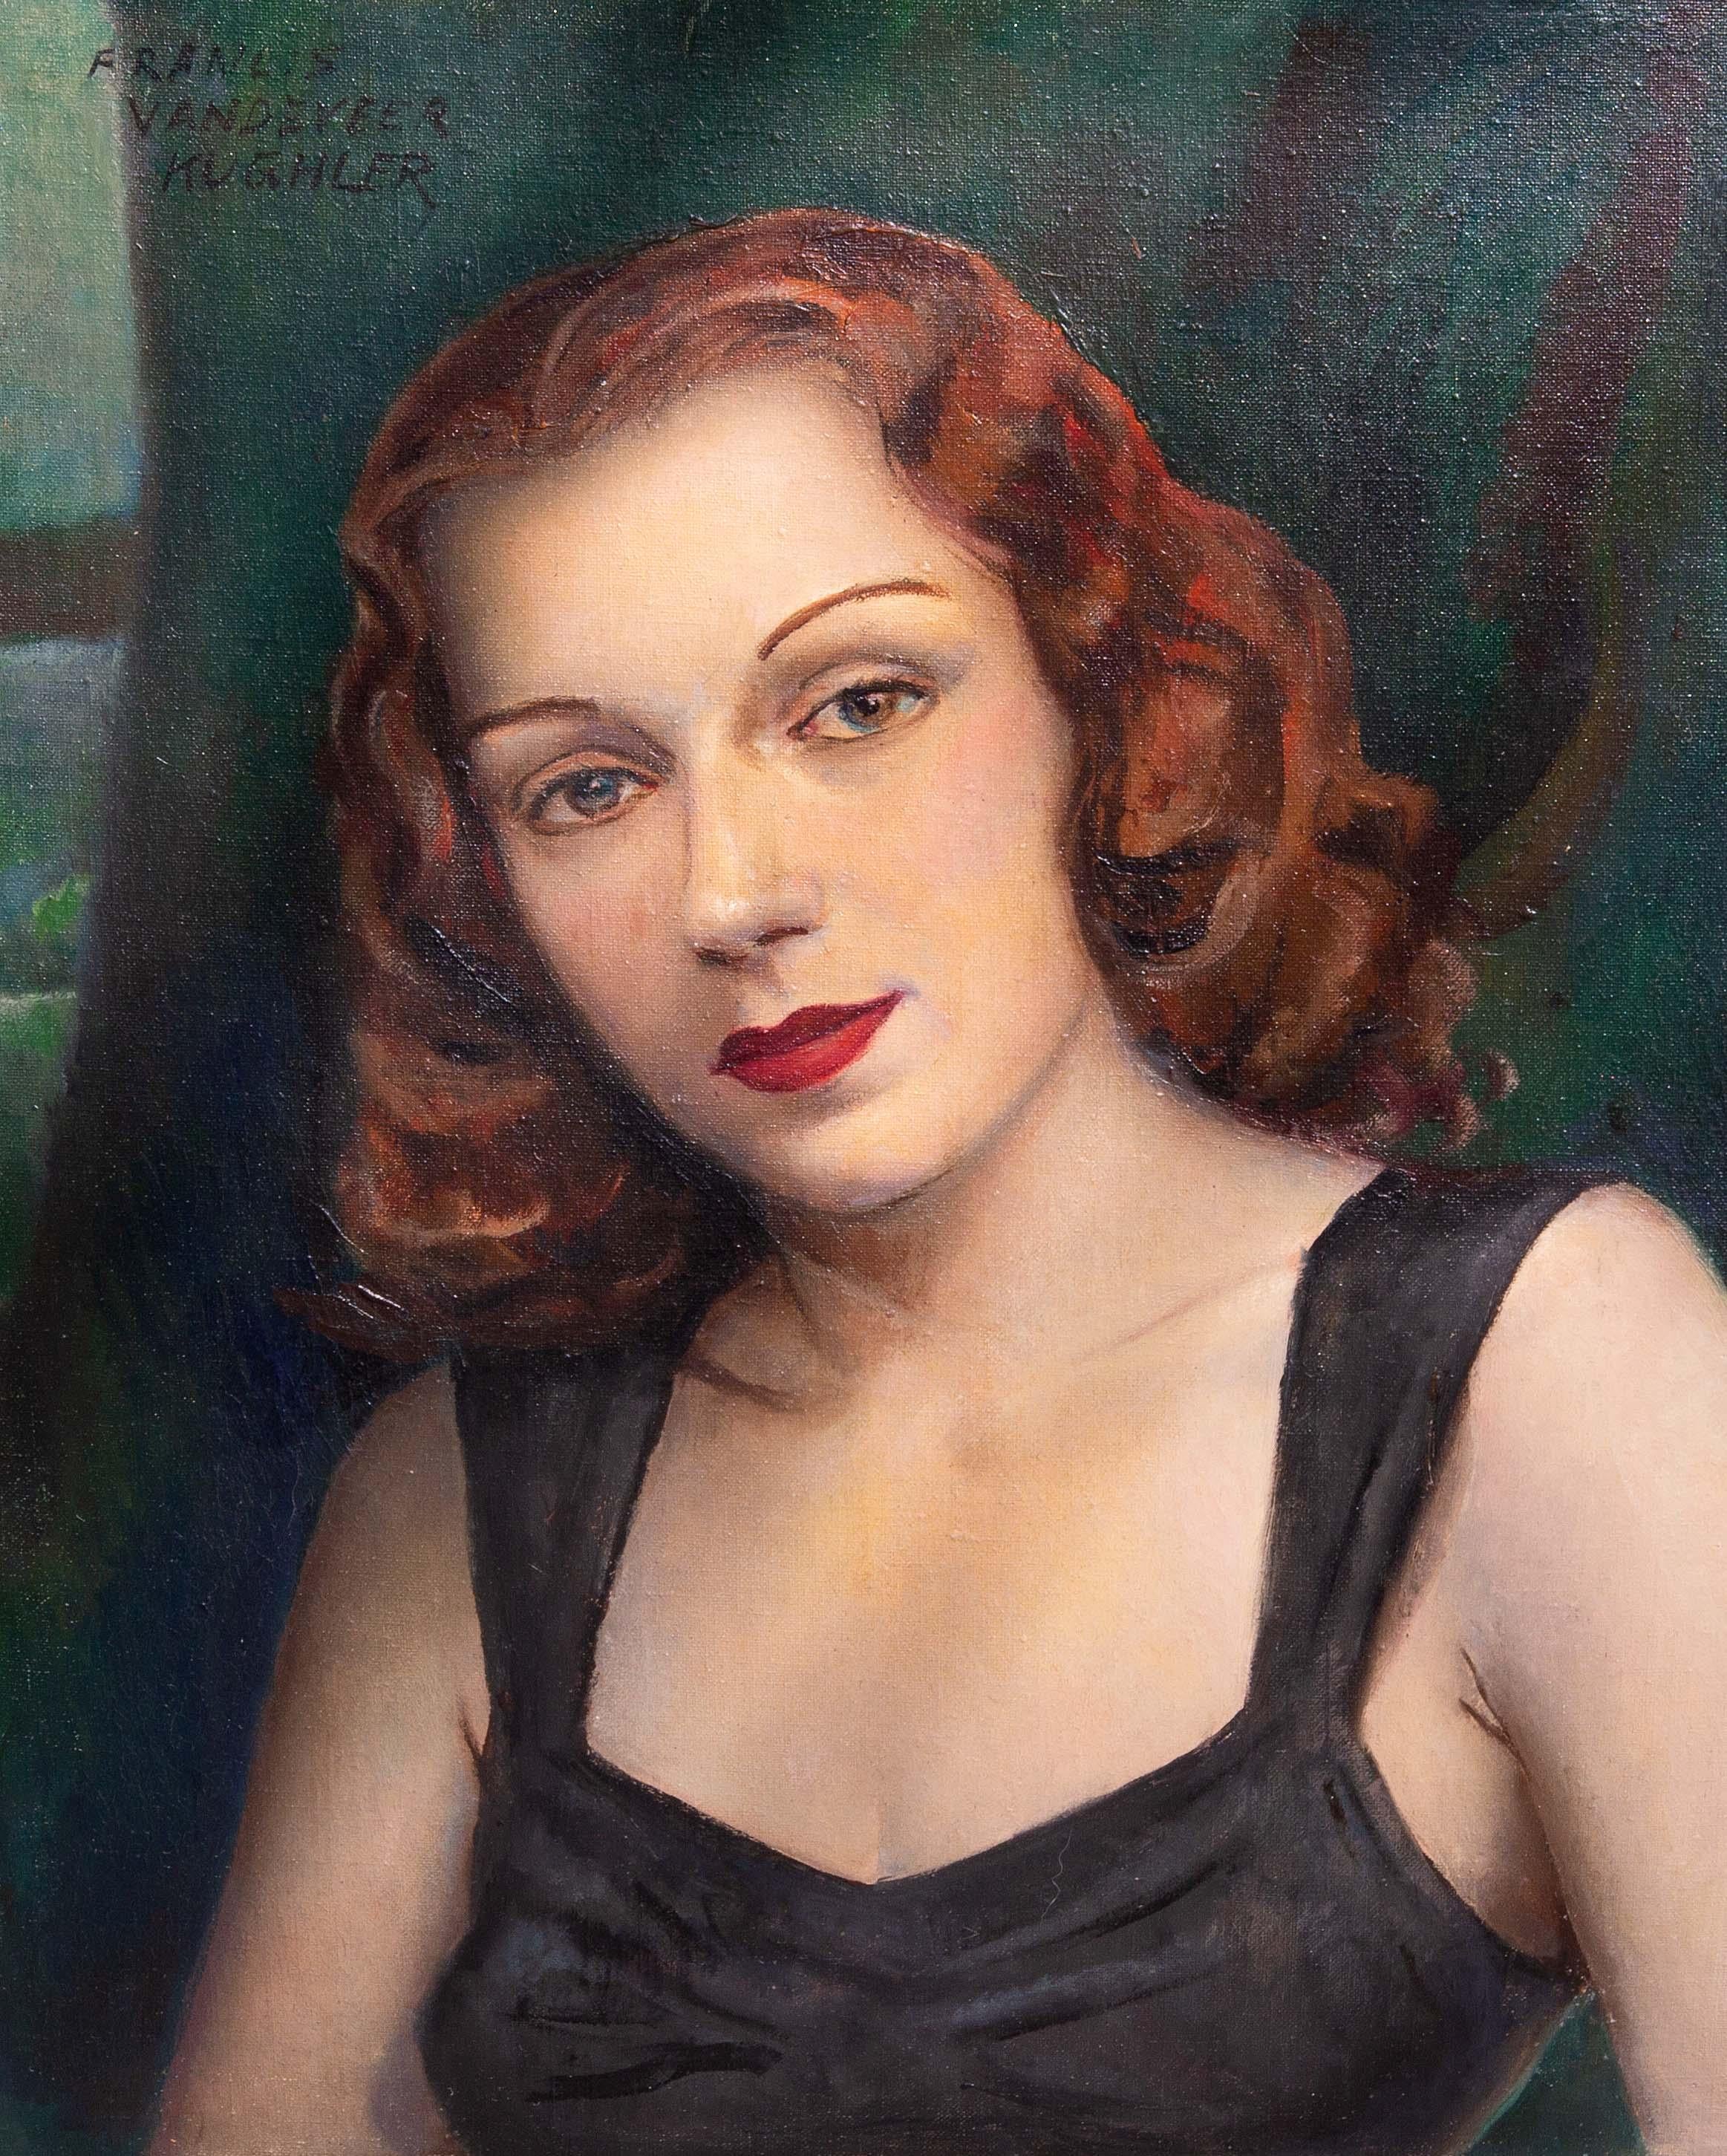 Hollywood regency portrait painting of a young woman by Francis Kughler (American 1901-1970). Oil on canvas board. Circa 1932. Unframed.
Born in New York City in 1901, Francis Vandeveer Kughler attended Cooper Union, the Mechanics' Institute, and